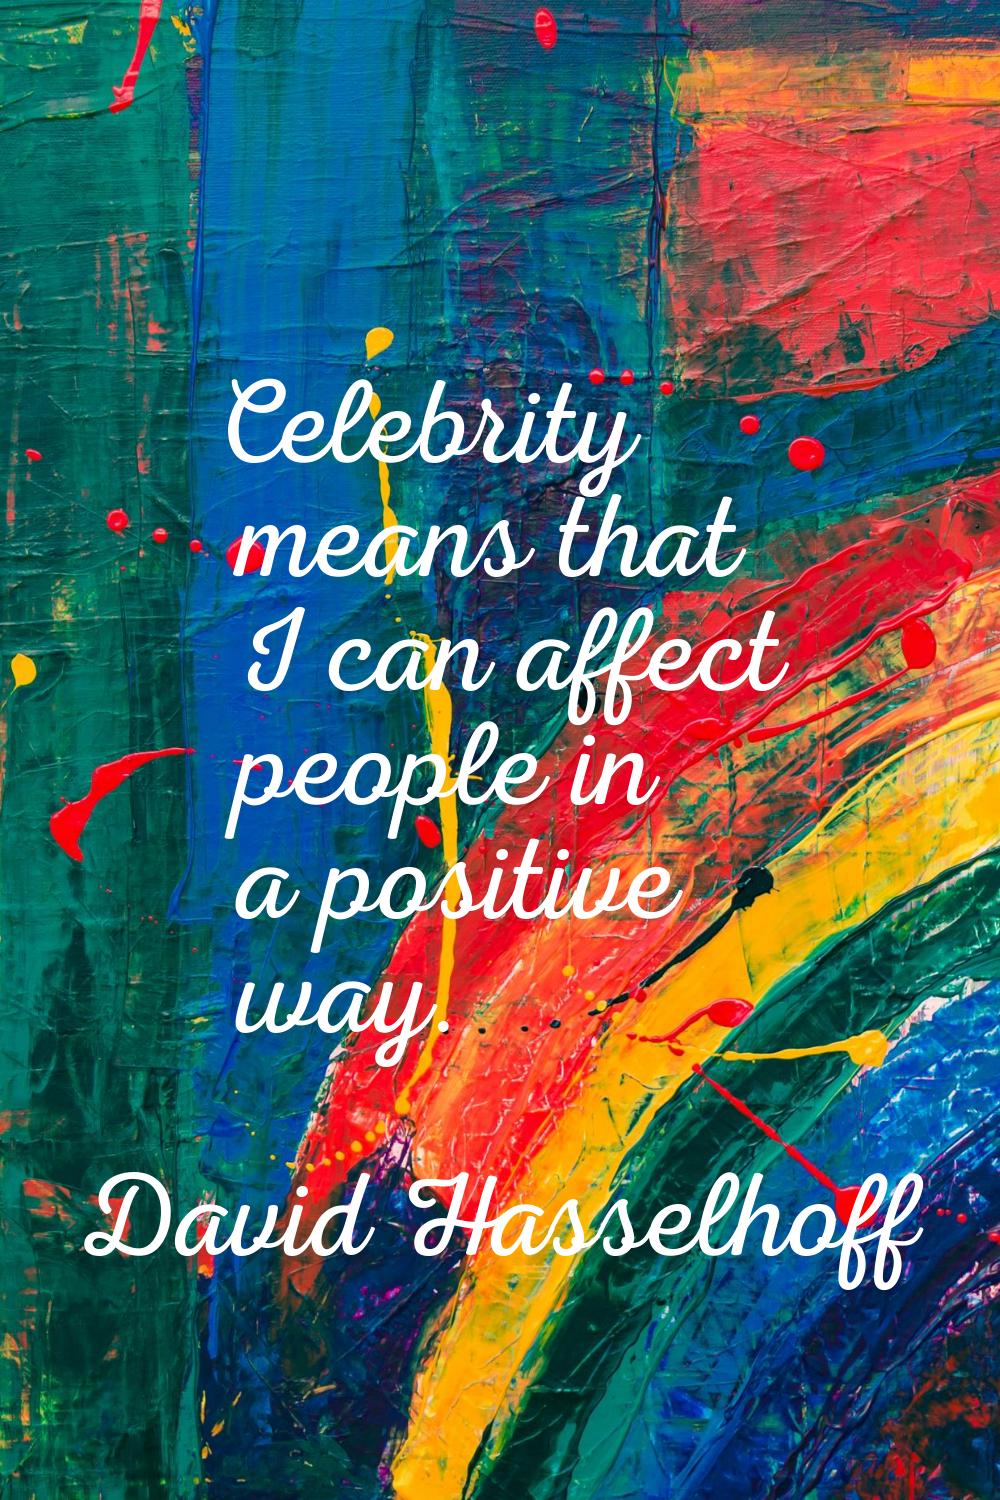 Celebrity means that I can affect people in a positive way.